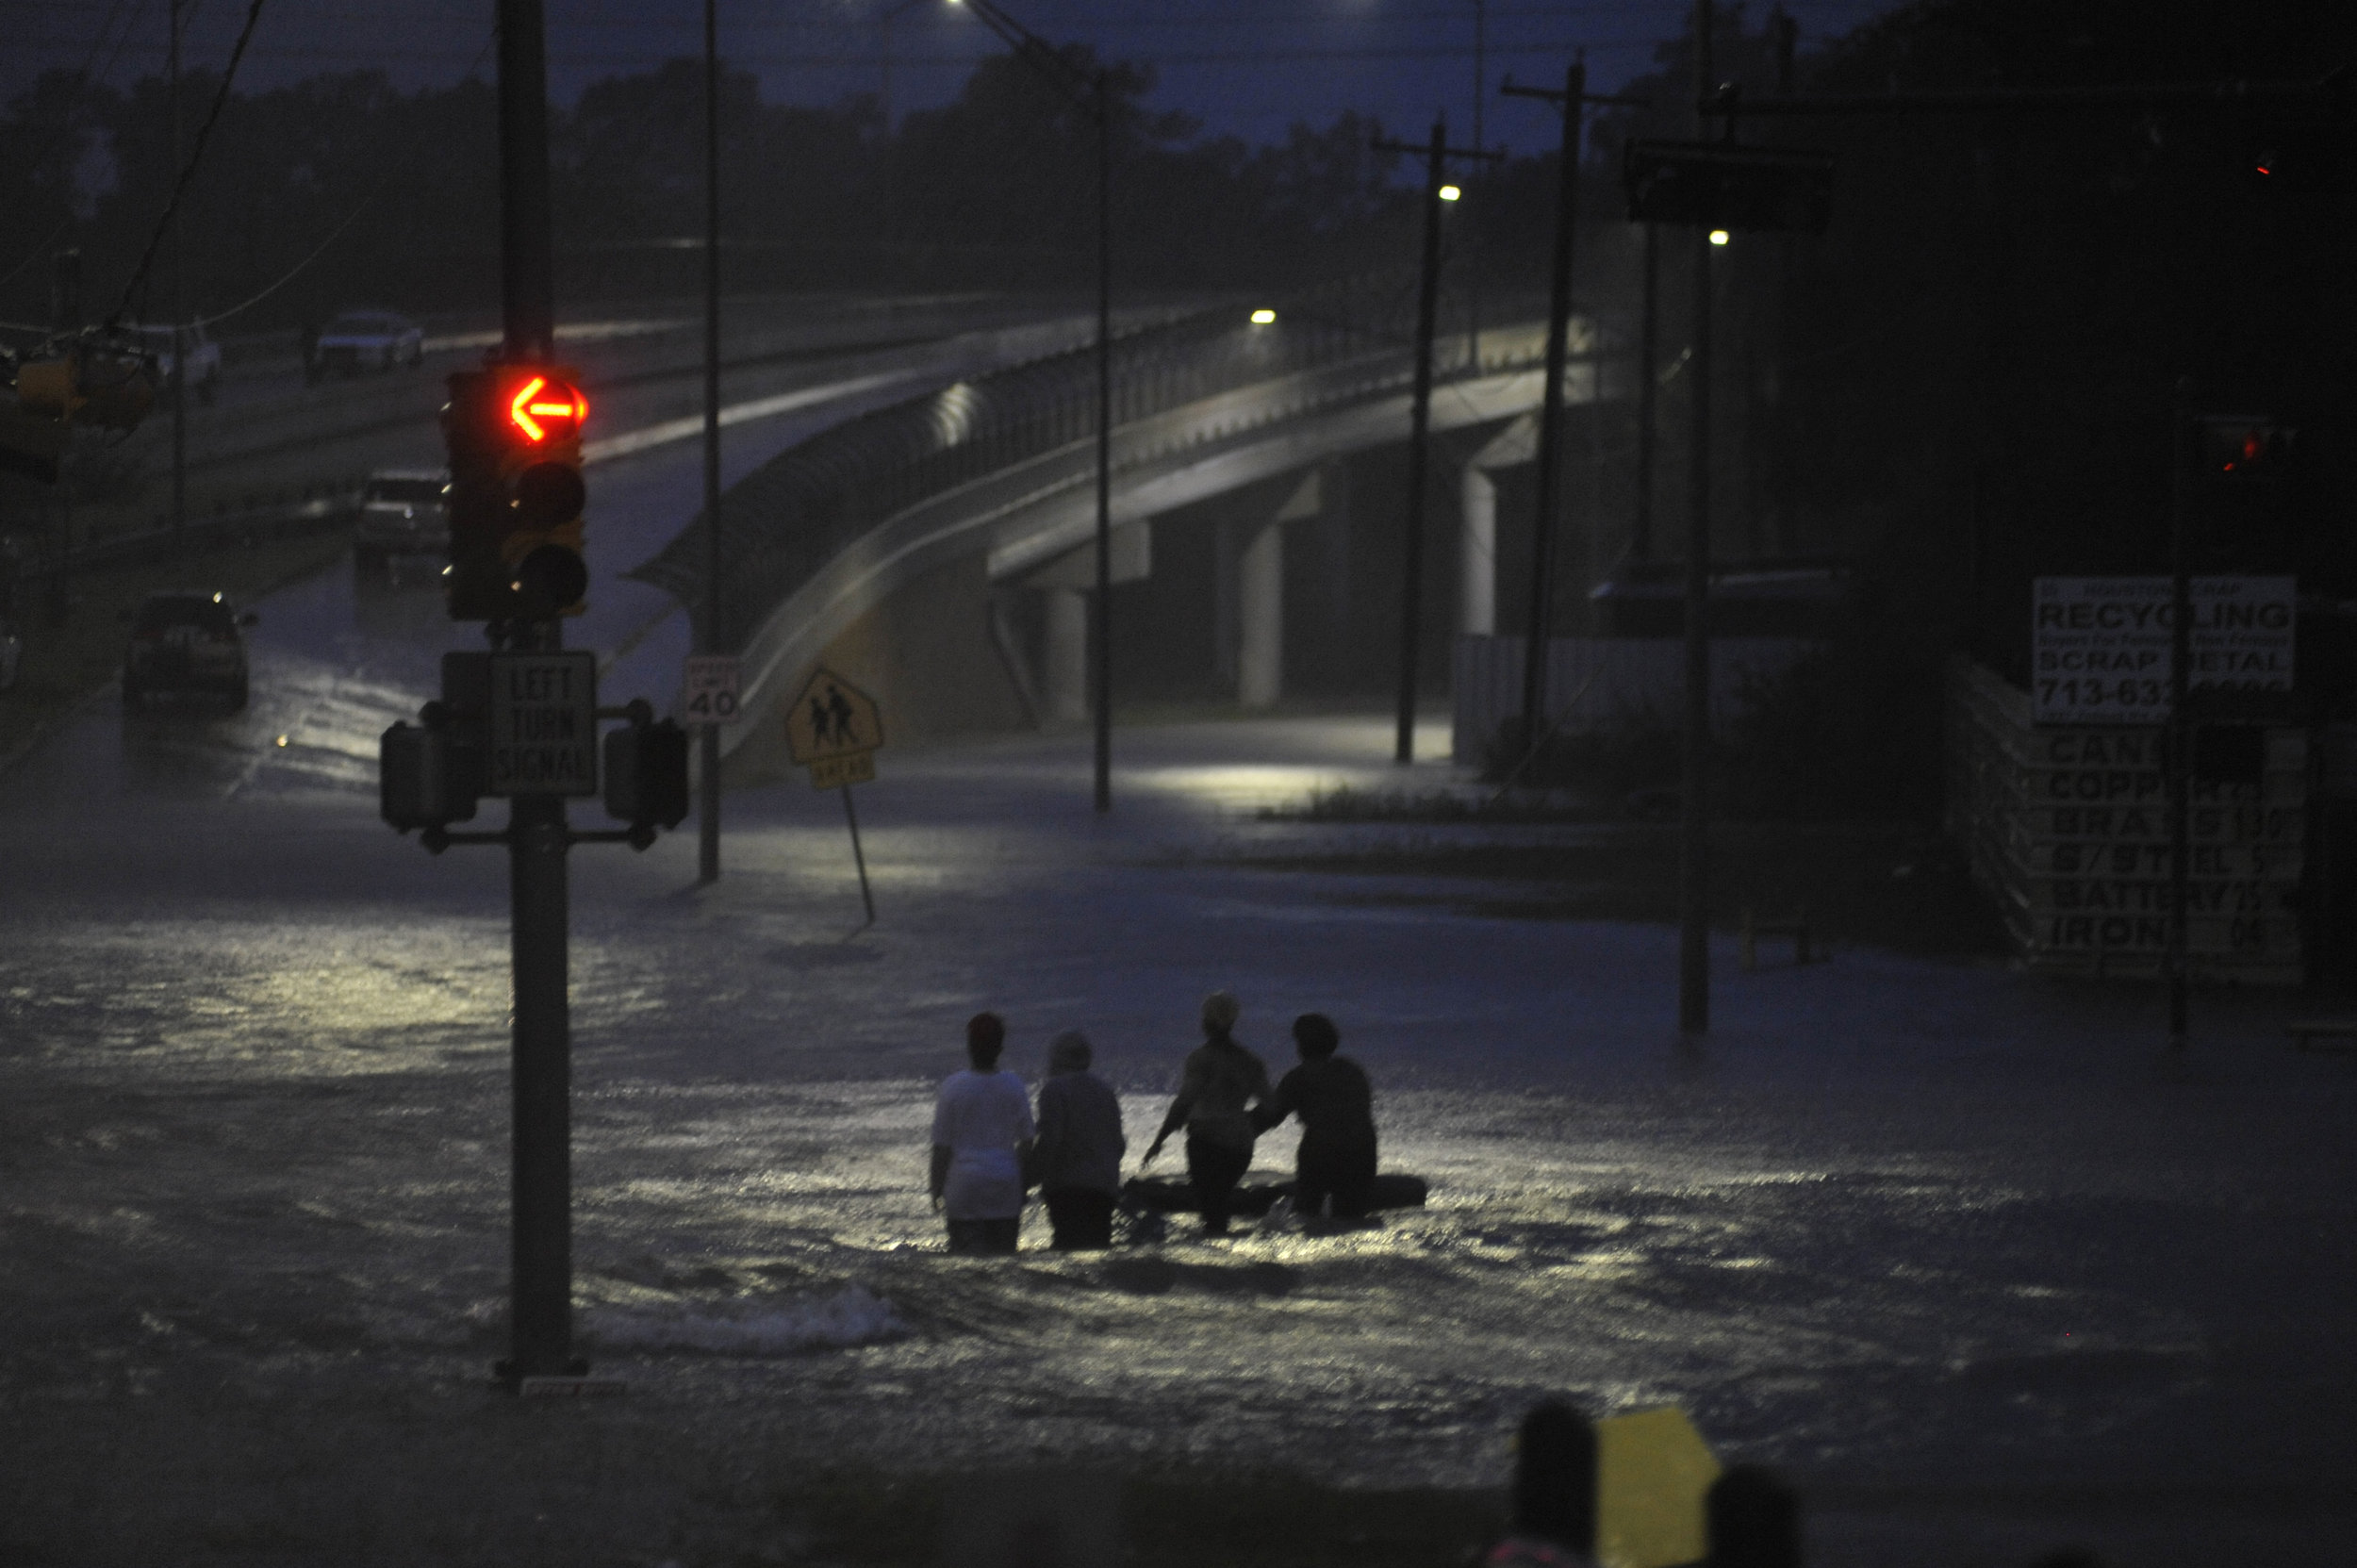  Residents wade through floodwater after Hurricane Harvey inundated the Texas Gulf coast with rain causing widespread flooding, in Houston, Texas, U.S. August 28, 2017.  REUTERS/Nick Oxford 